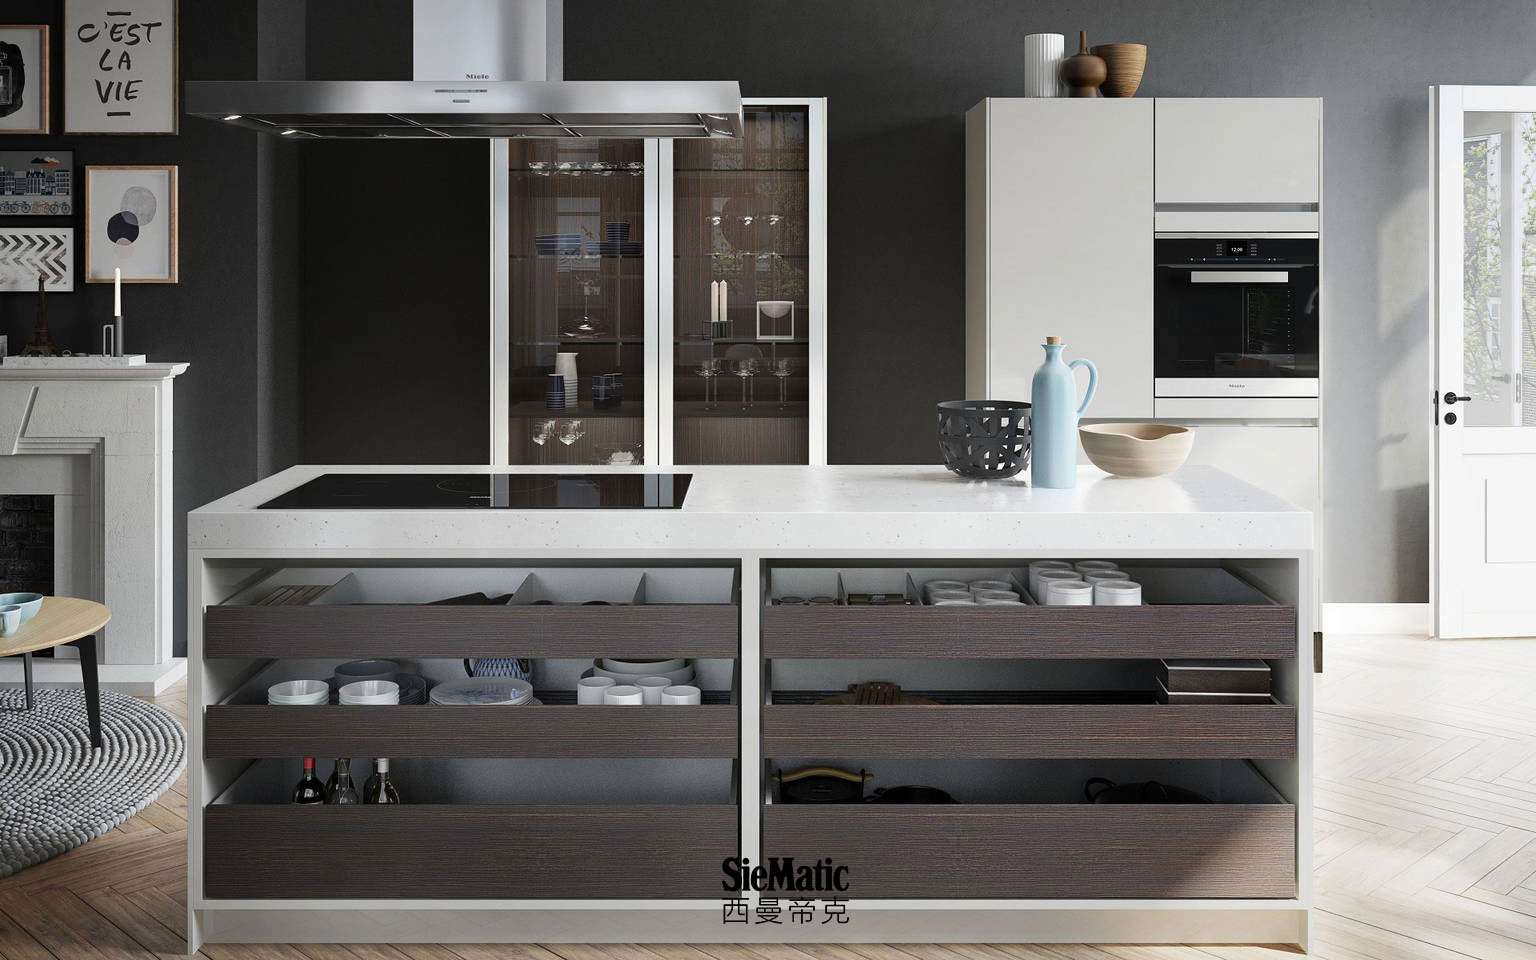 SieMatic kitchen island from the Urban style collection with countertop made from composite stone